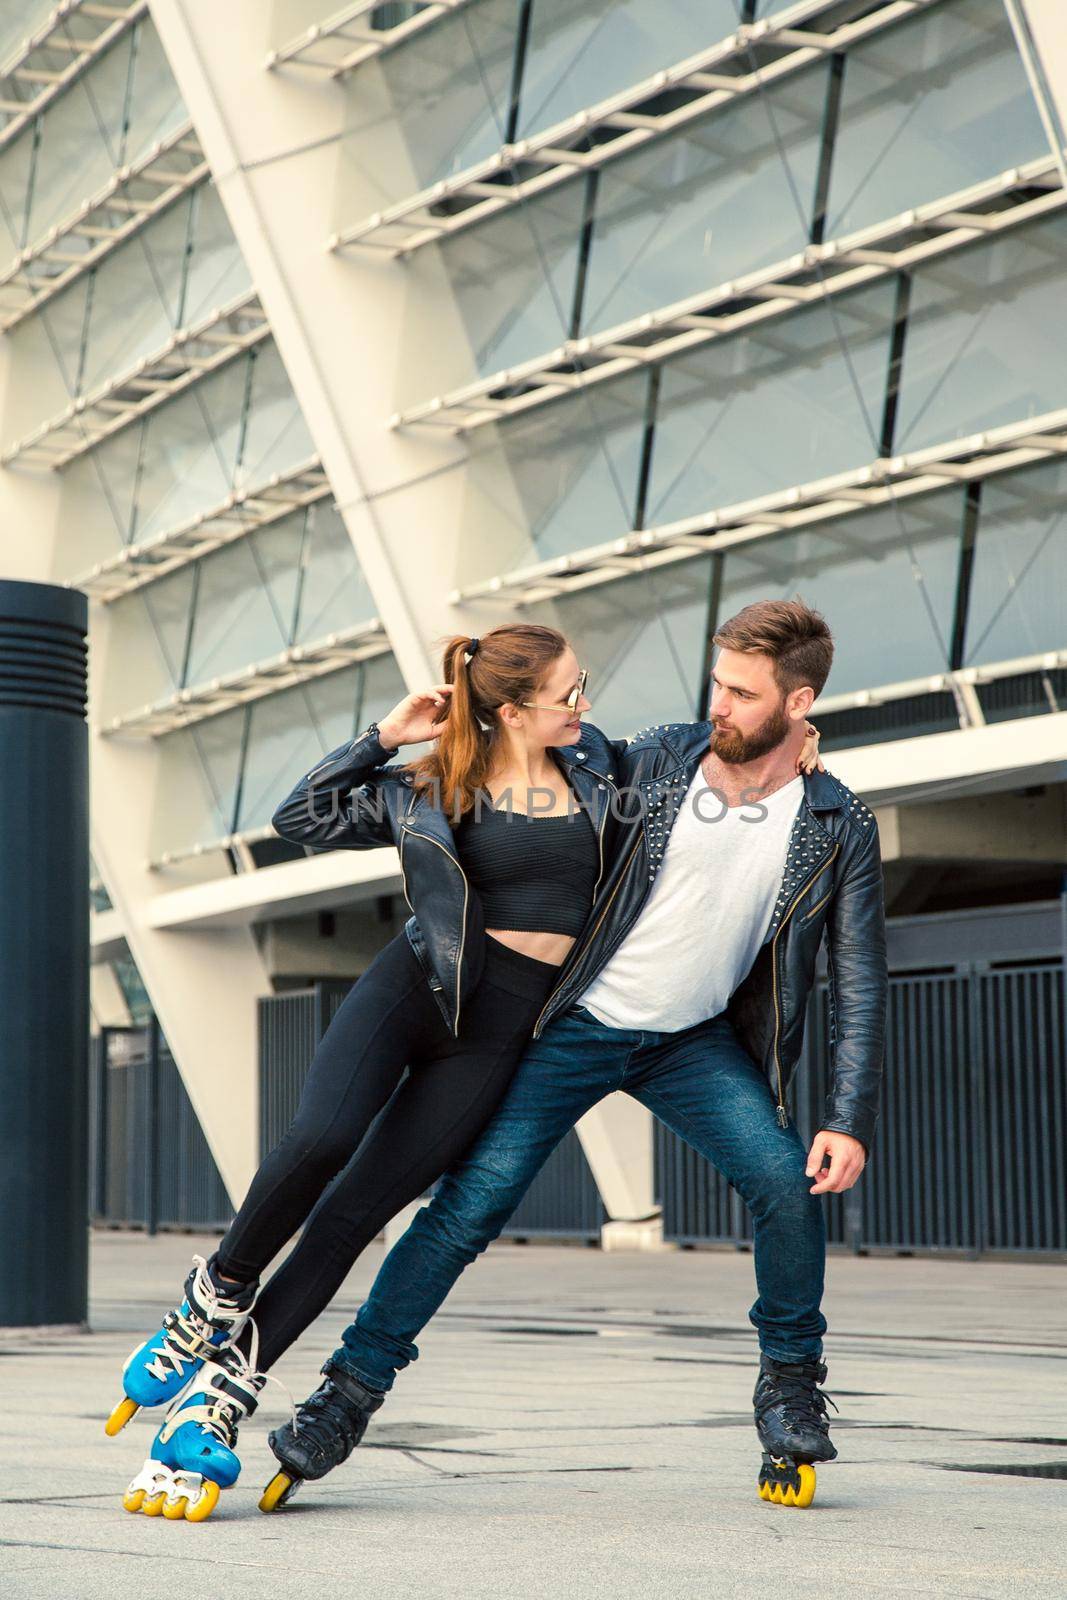 Beautiful roller skater couple with hipster style by Khosro1